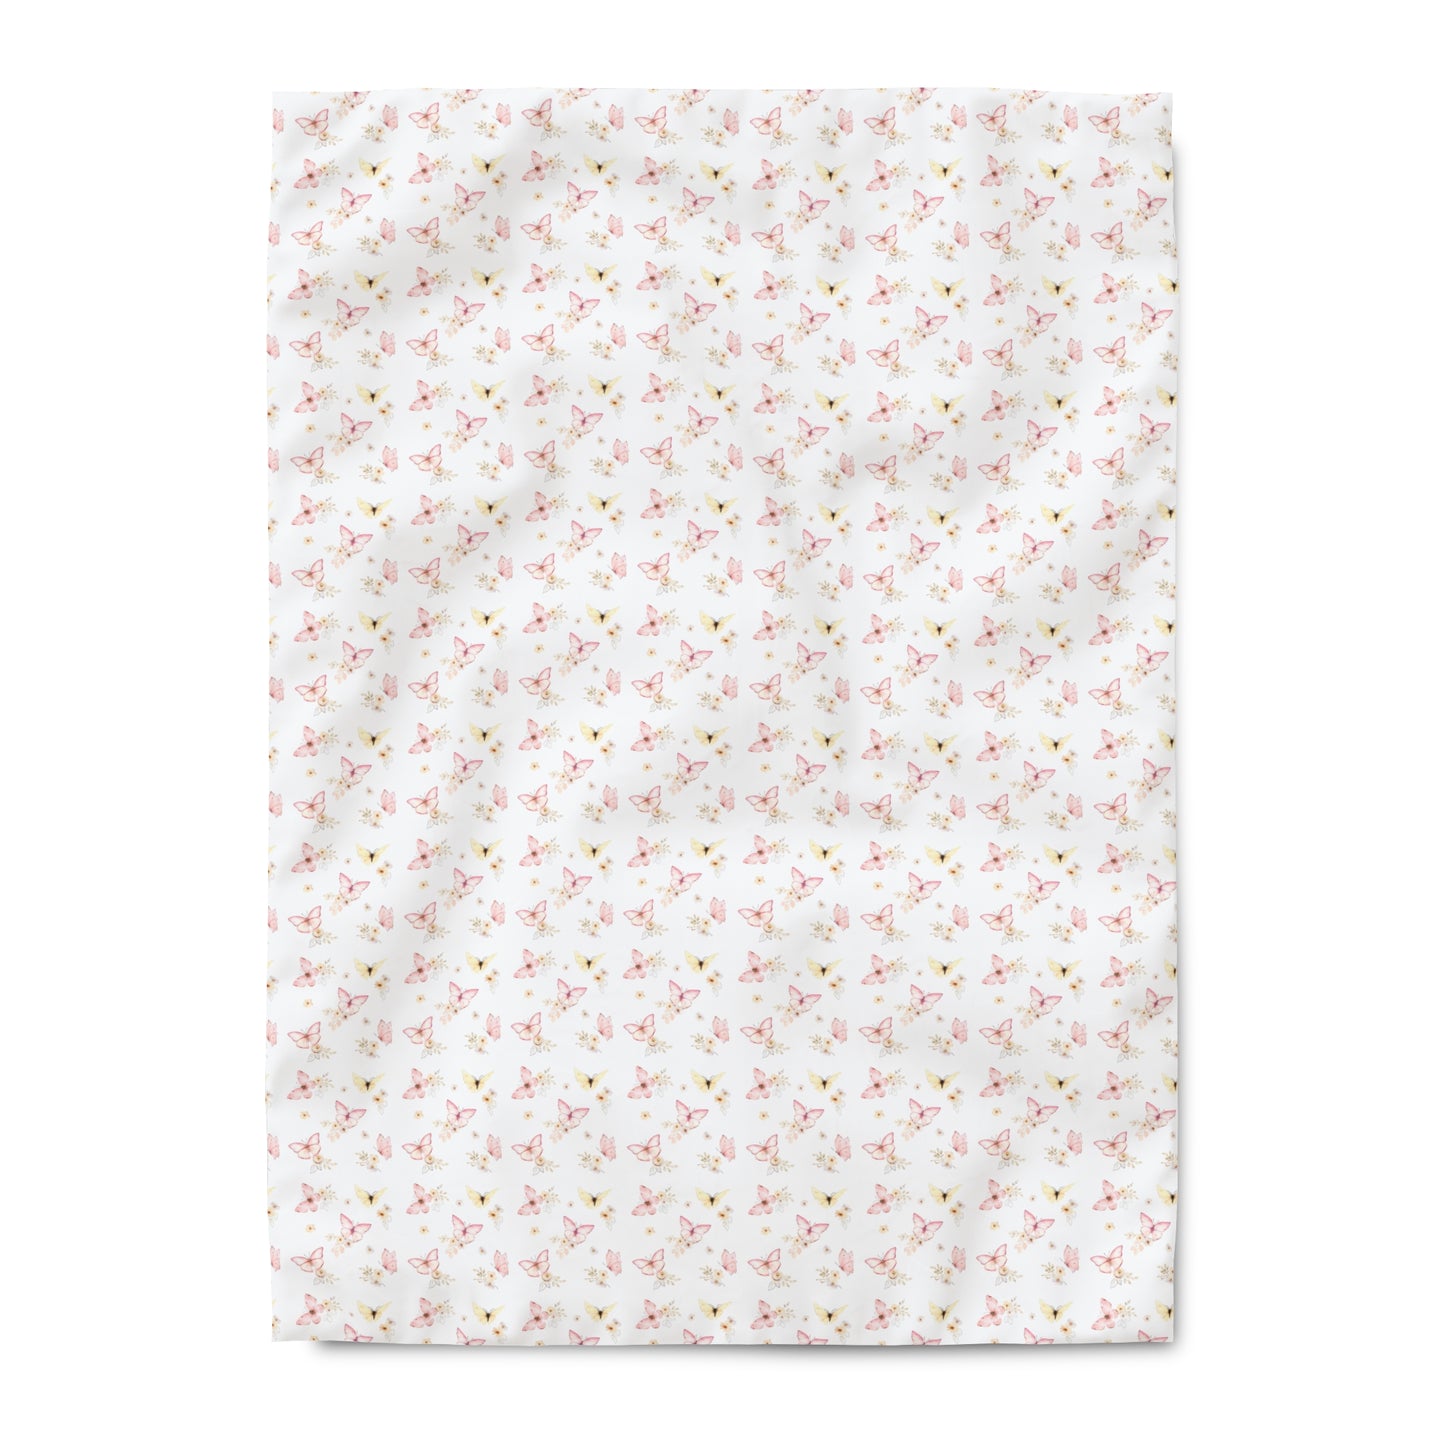 Pink & Yellow Butterfly Duvet Cover